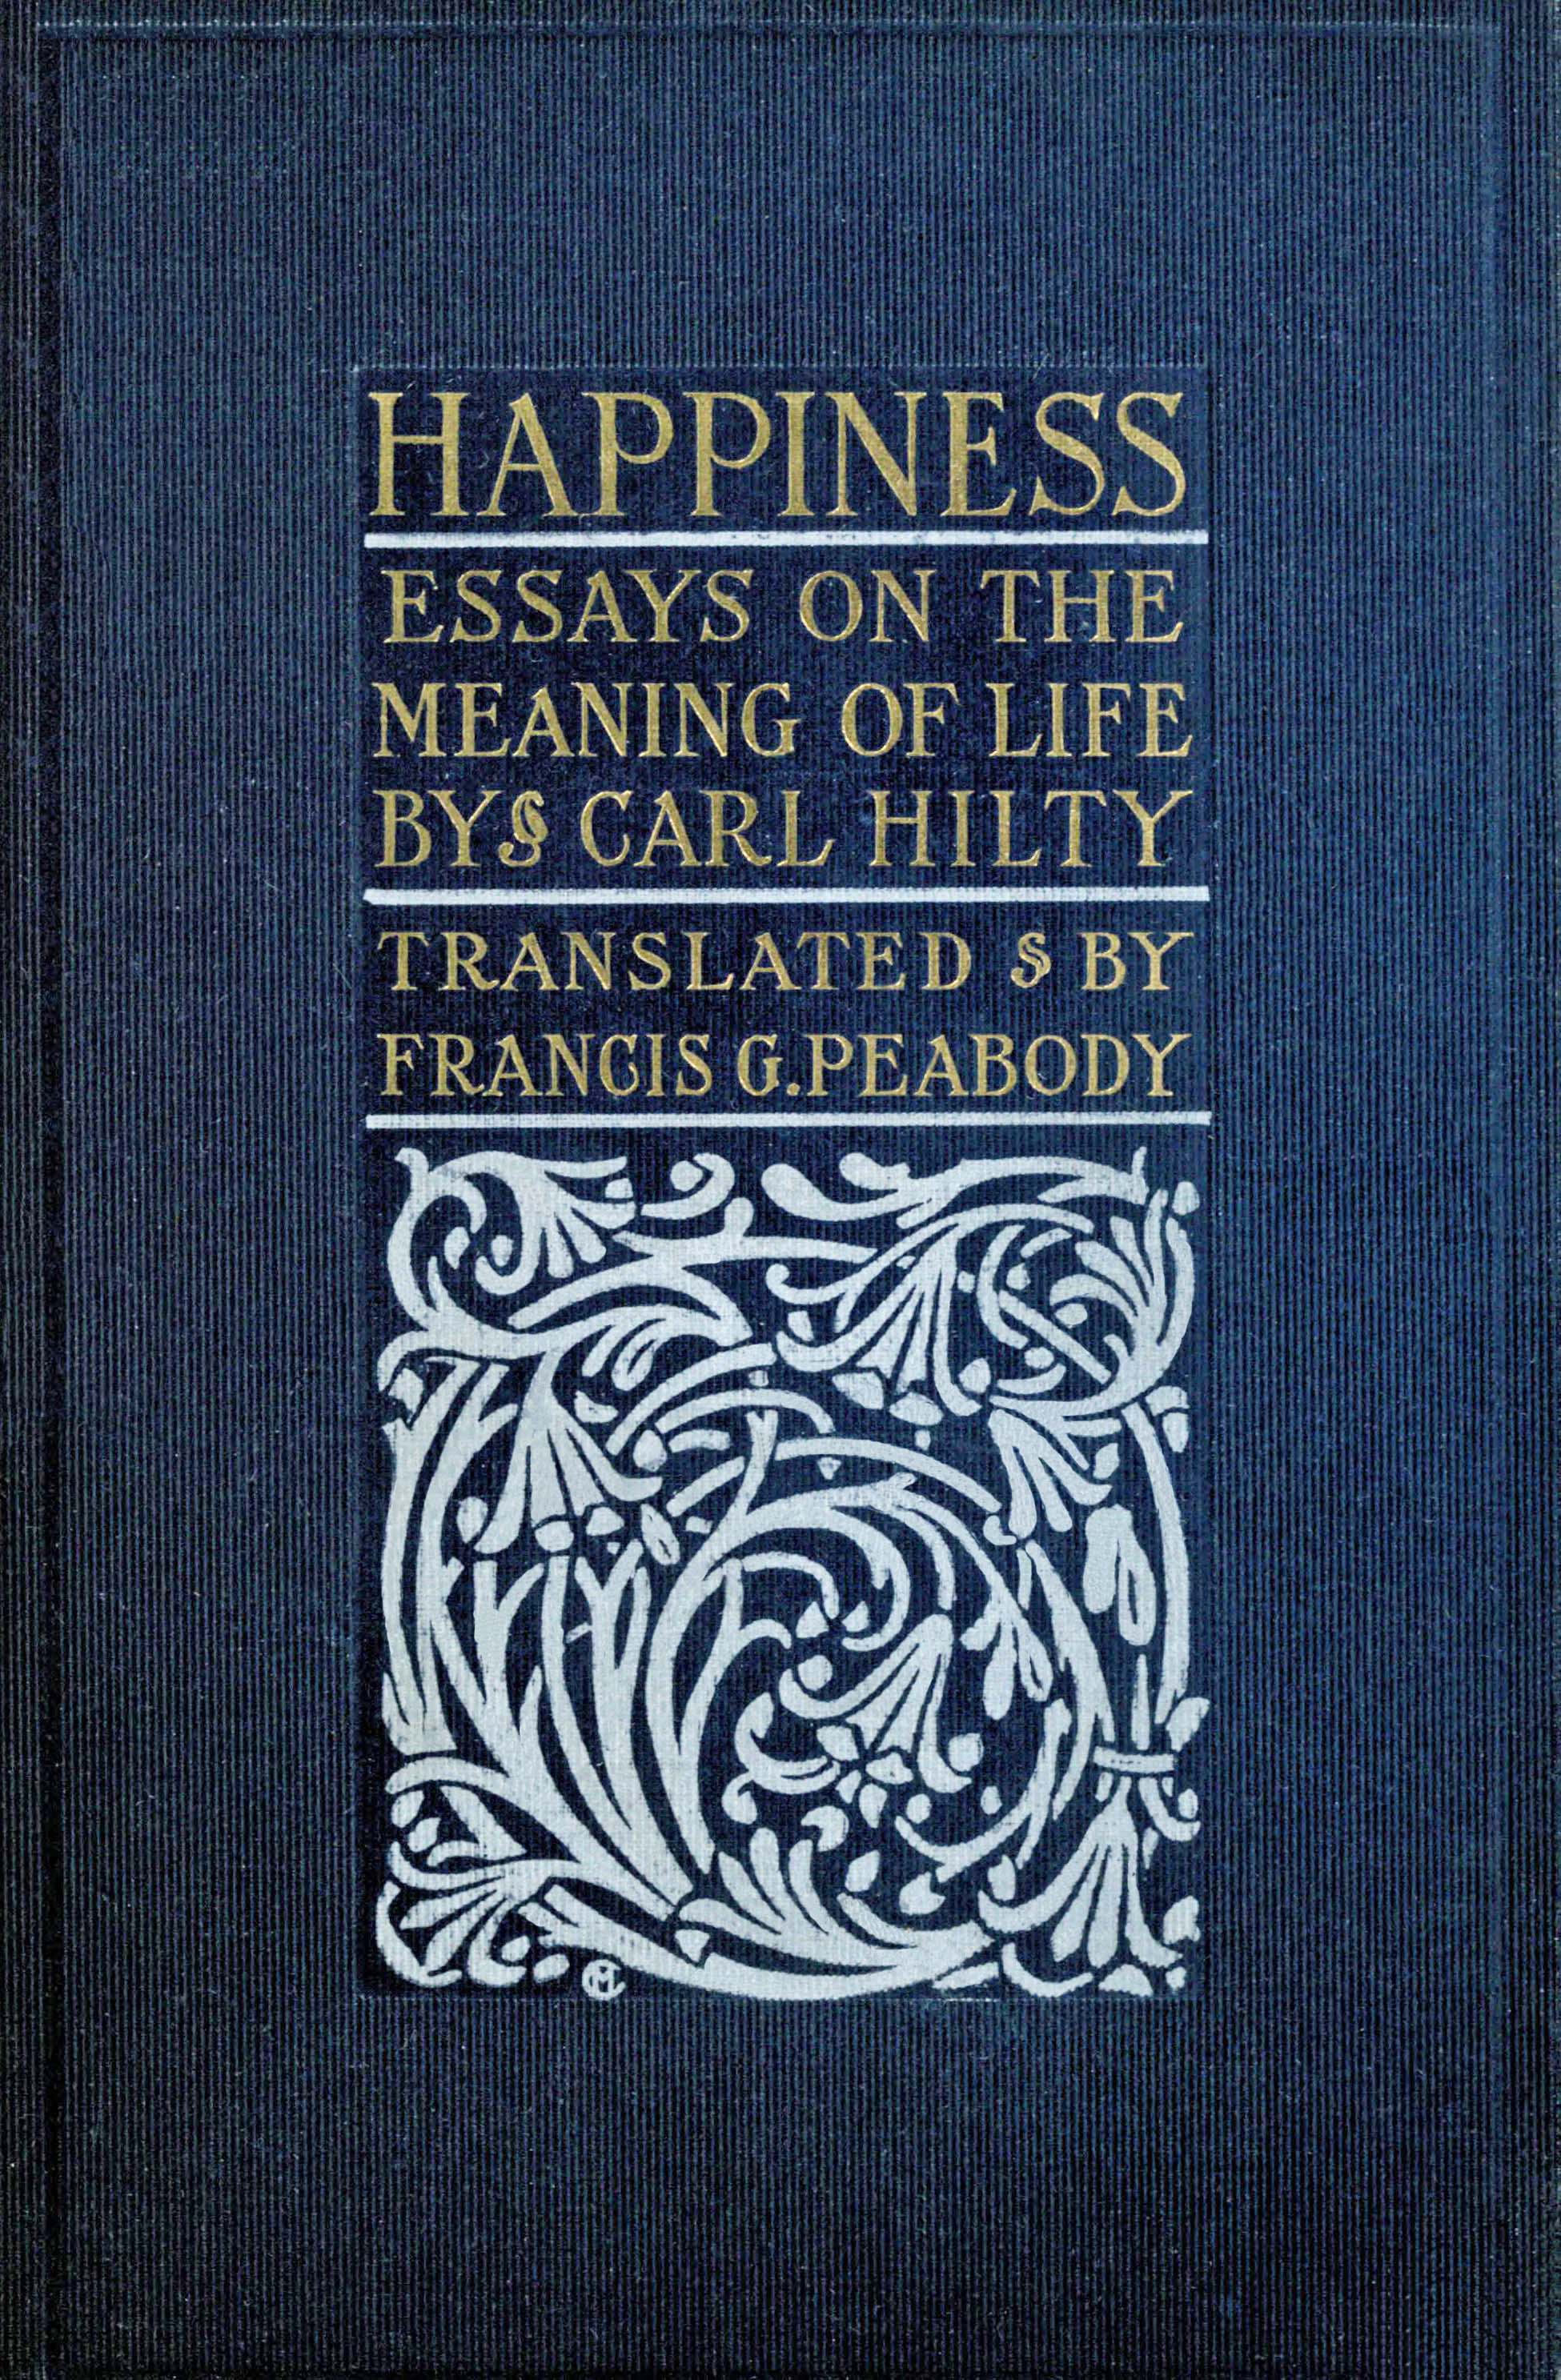 Happiness: Essays on the meaning of life